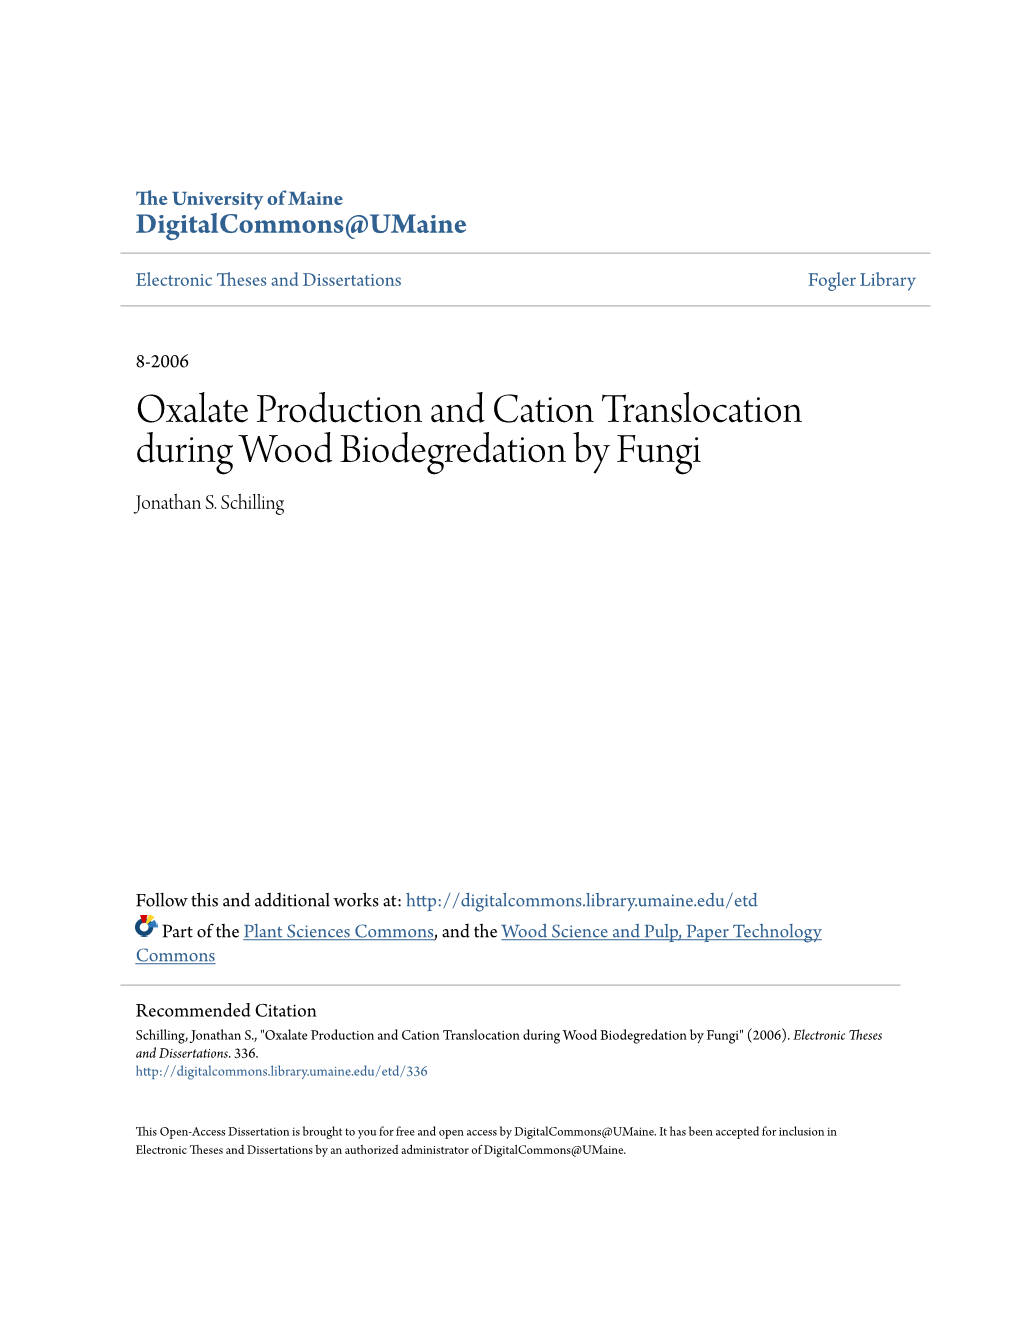 Oxalate Production and Cation Translocation During Wood Biodegredation by Fungi Jonathan S